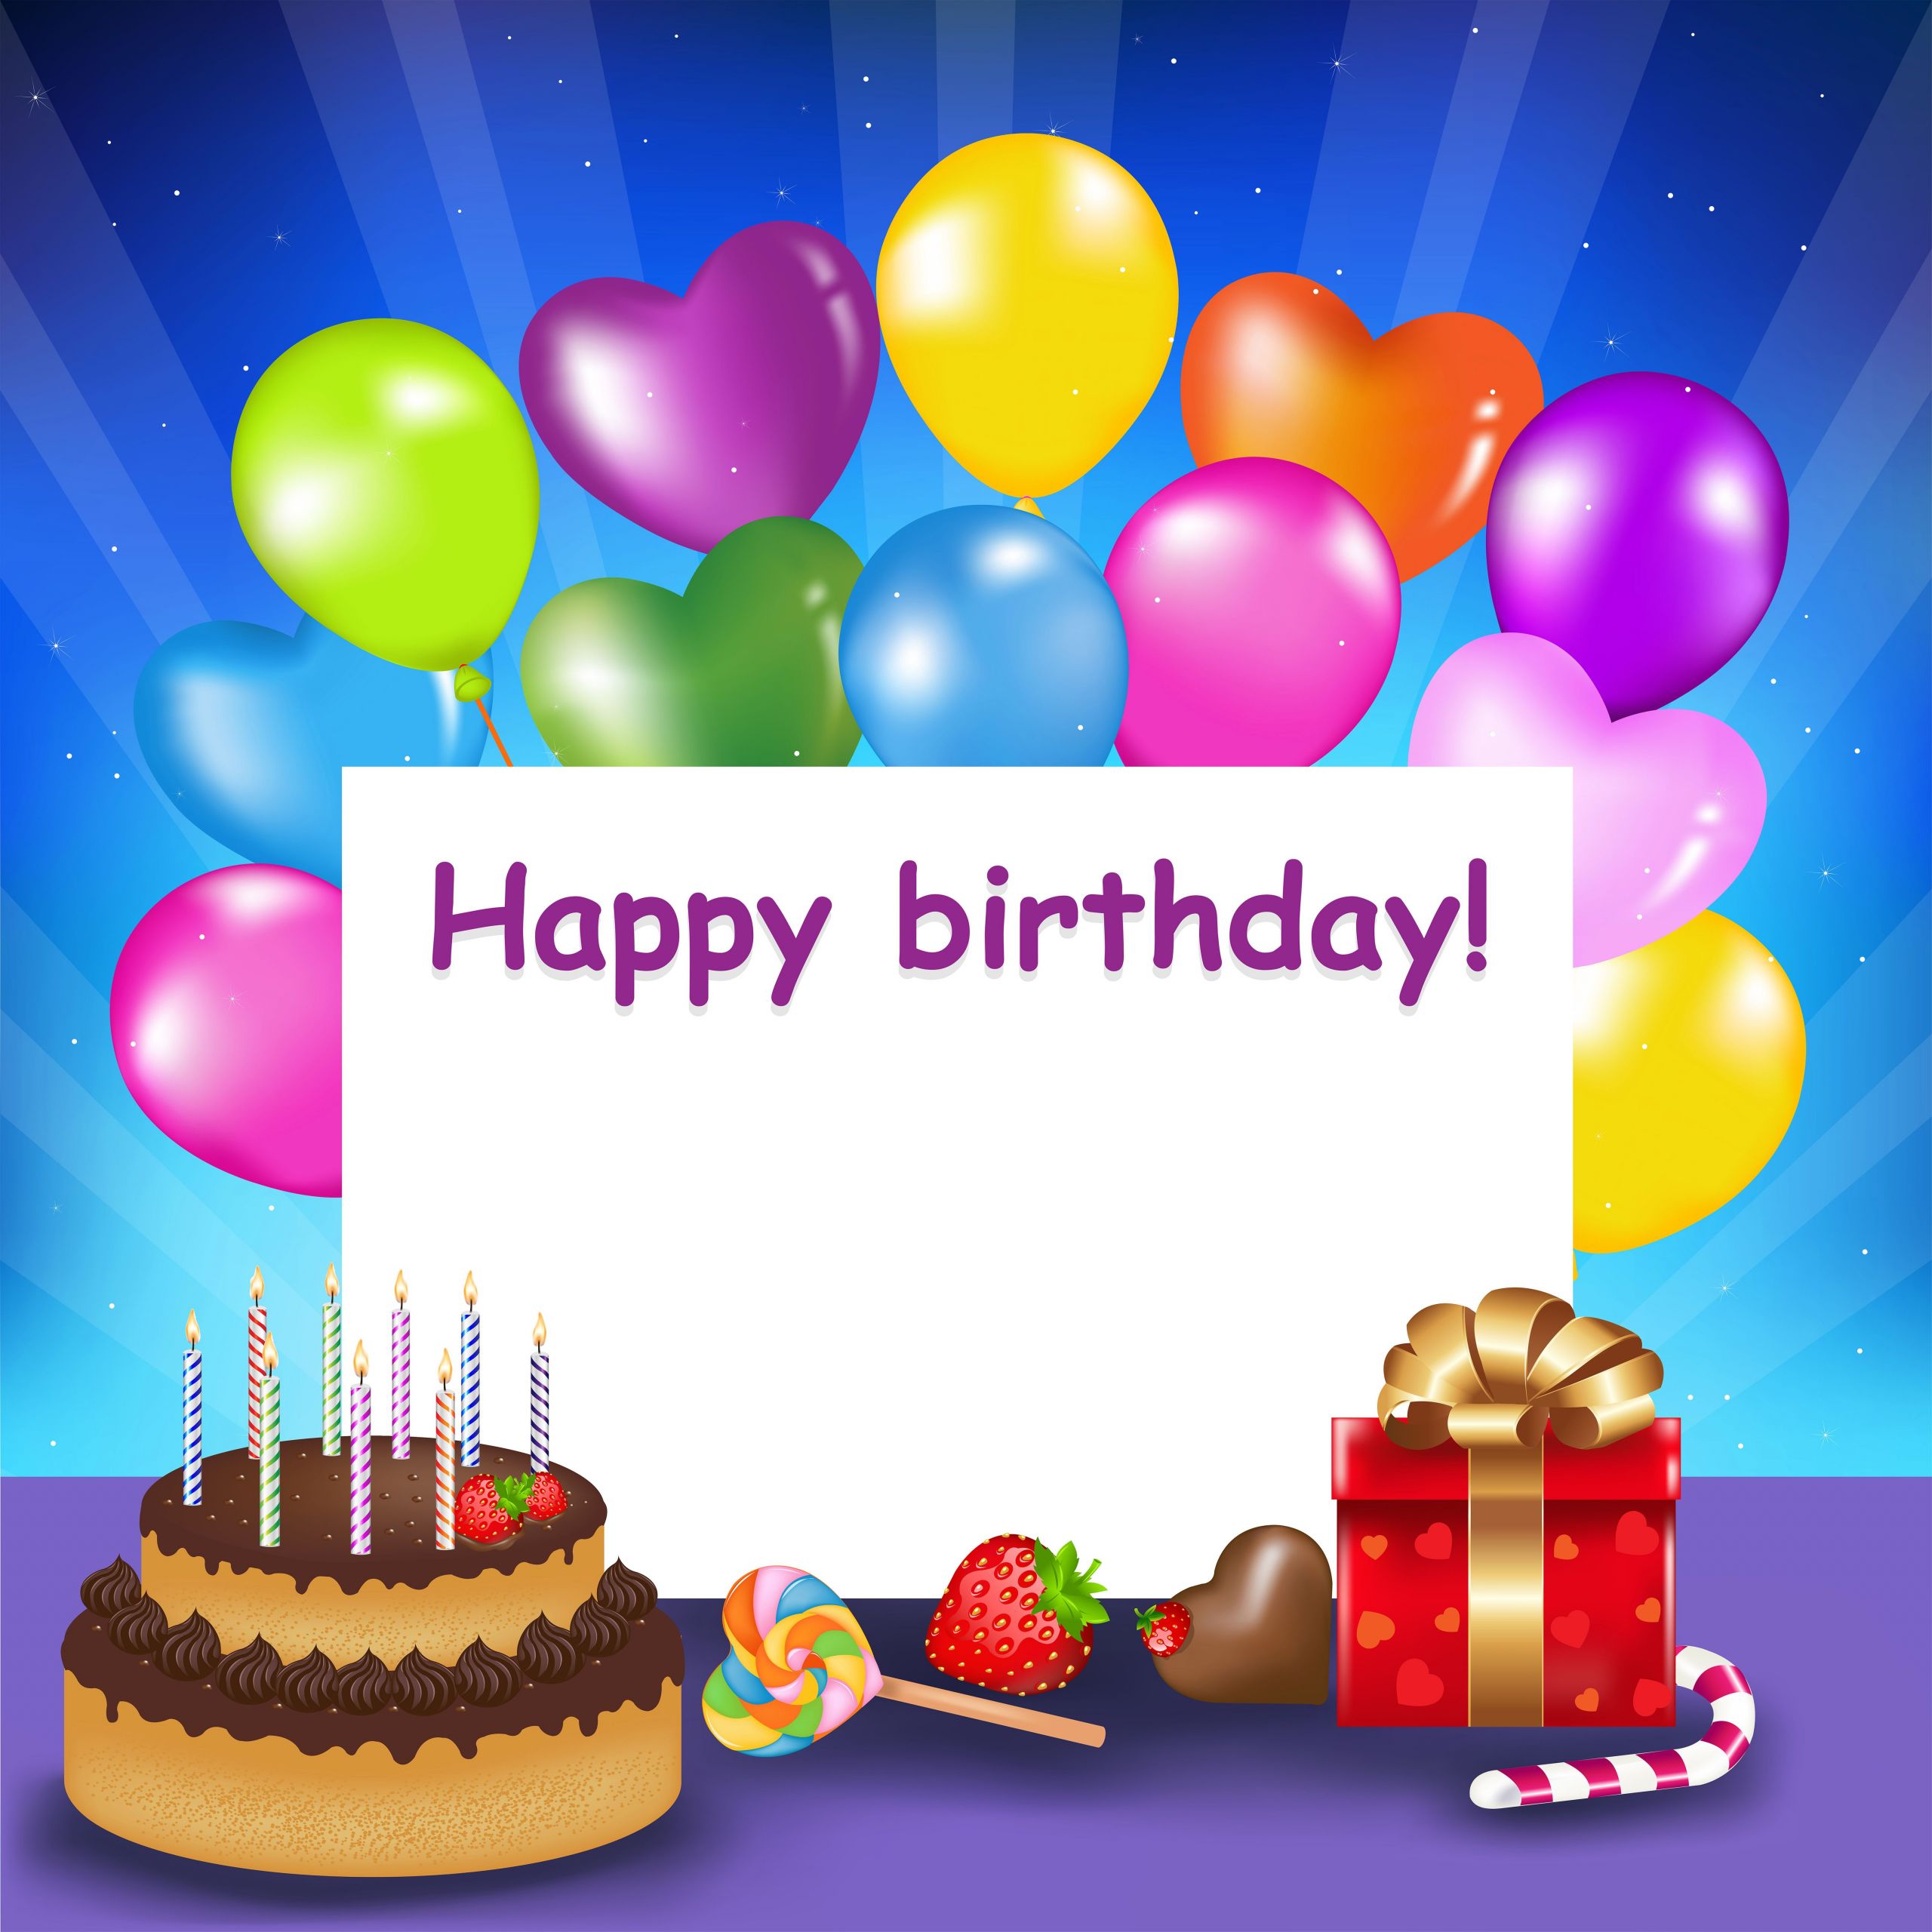 Happy Birthday Cake And Balloons
 Backgrounds Happy Birthday Wallpaper Cave